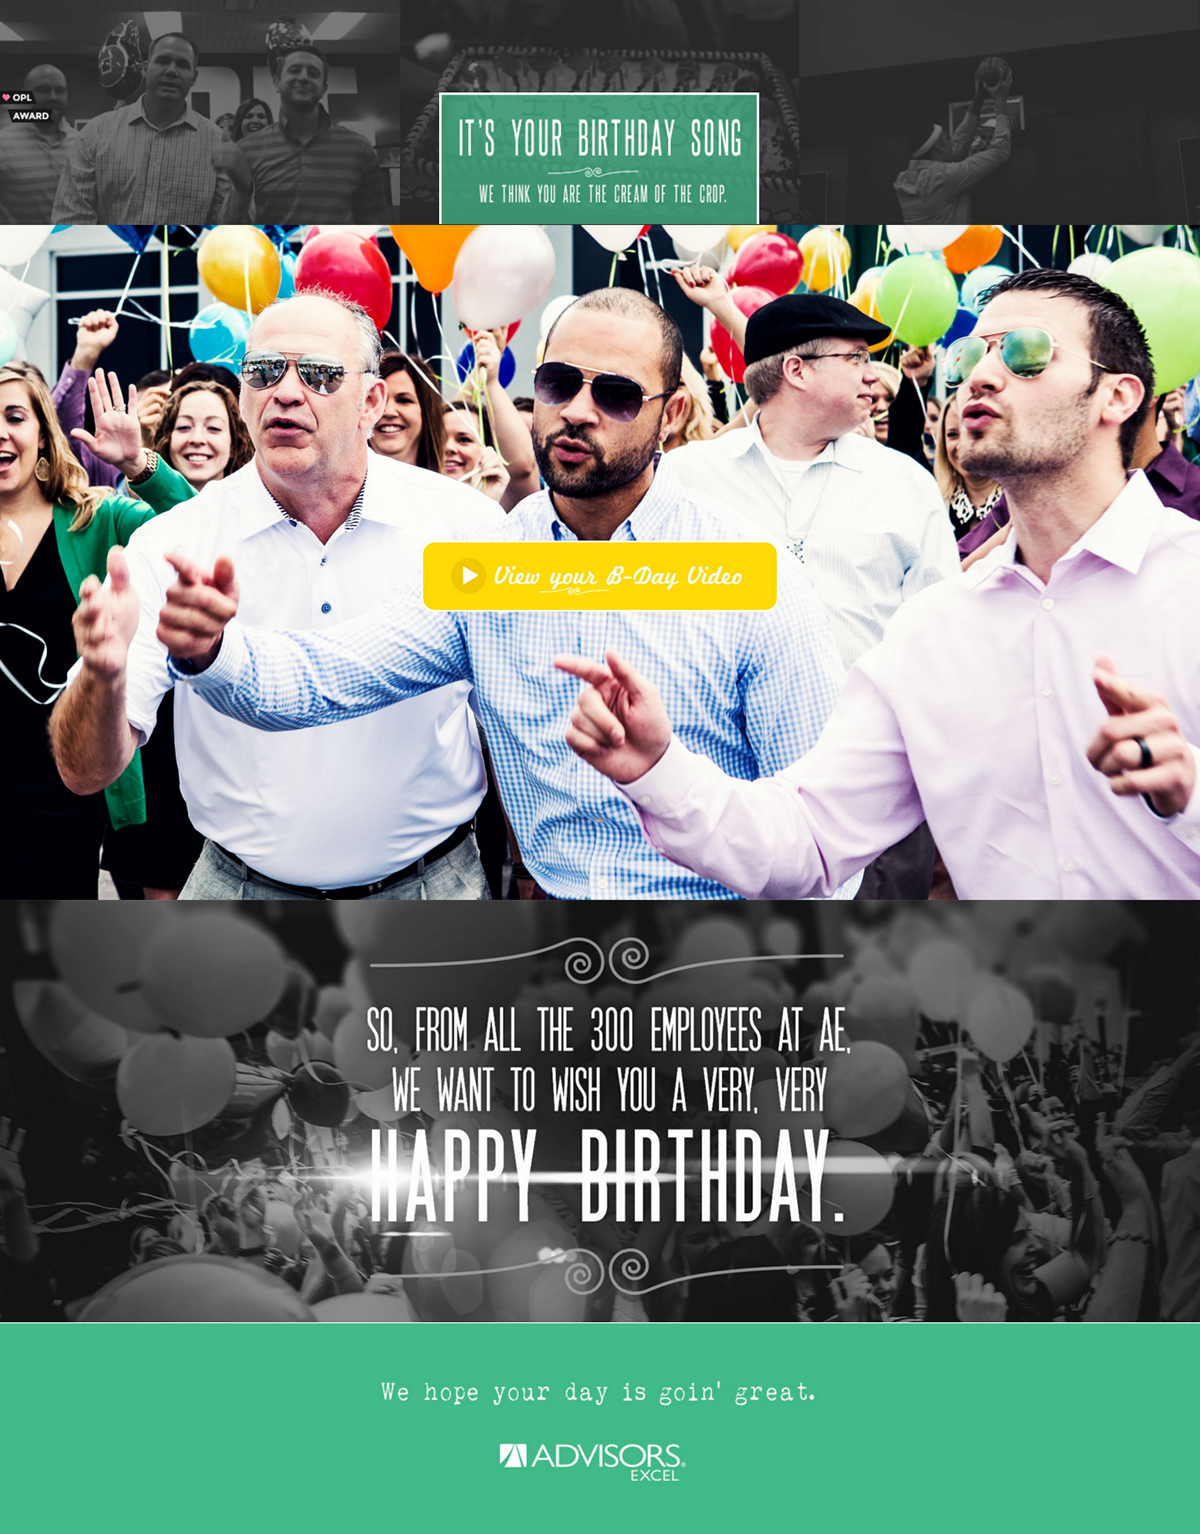 Birthday client appreciation landing page music video looping video Responsive css